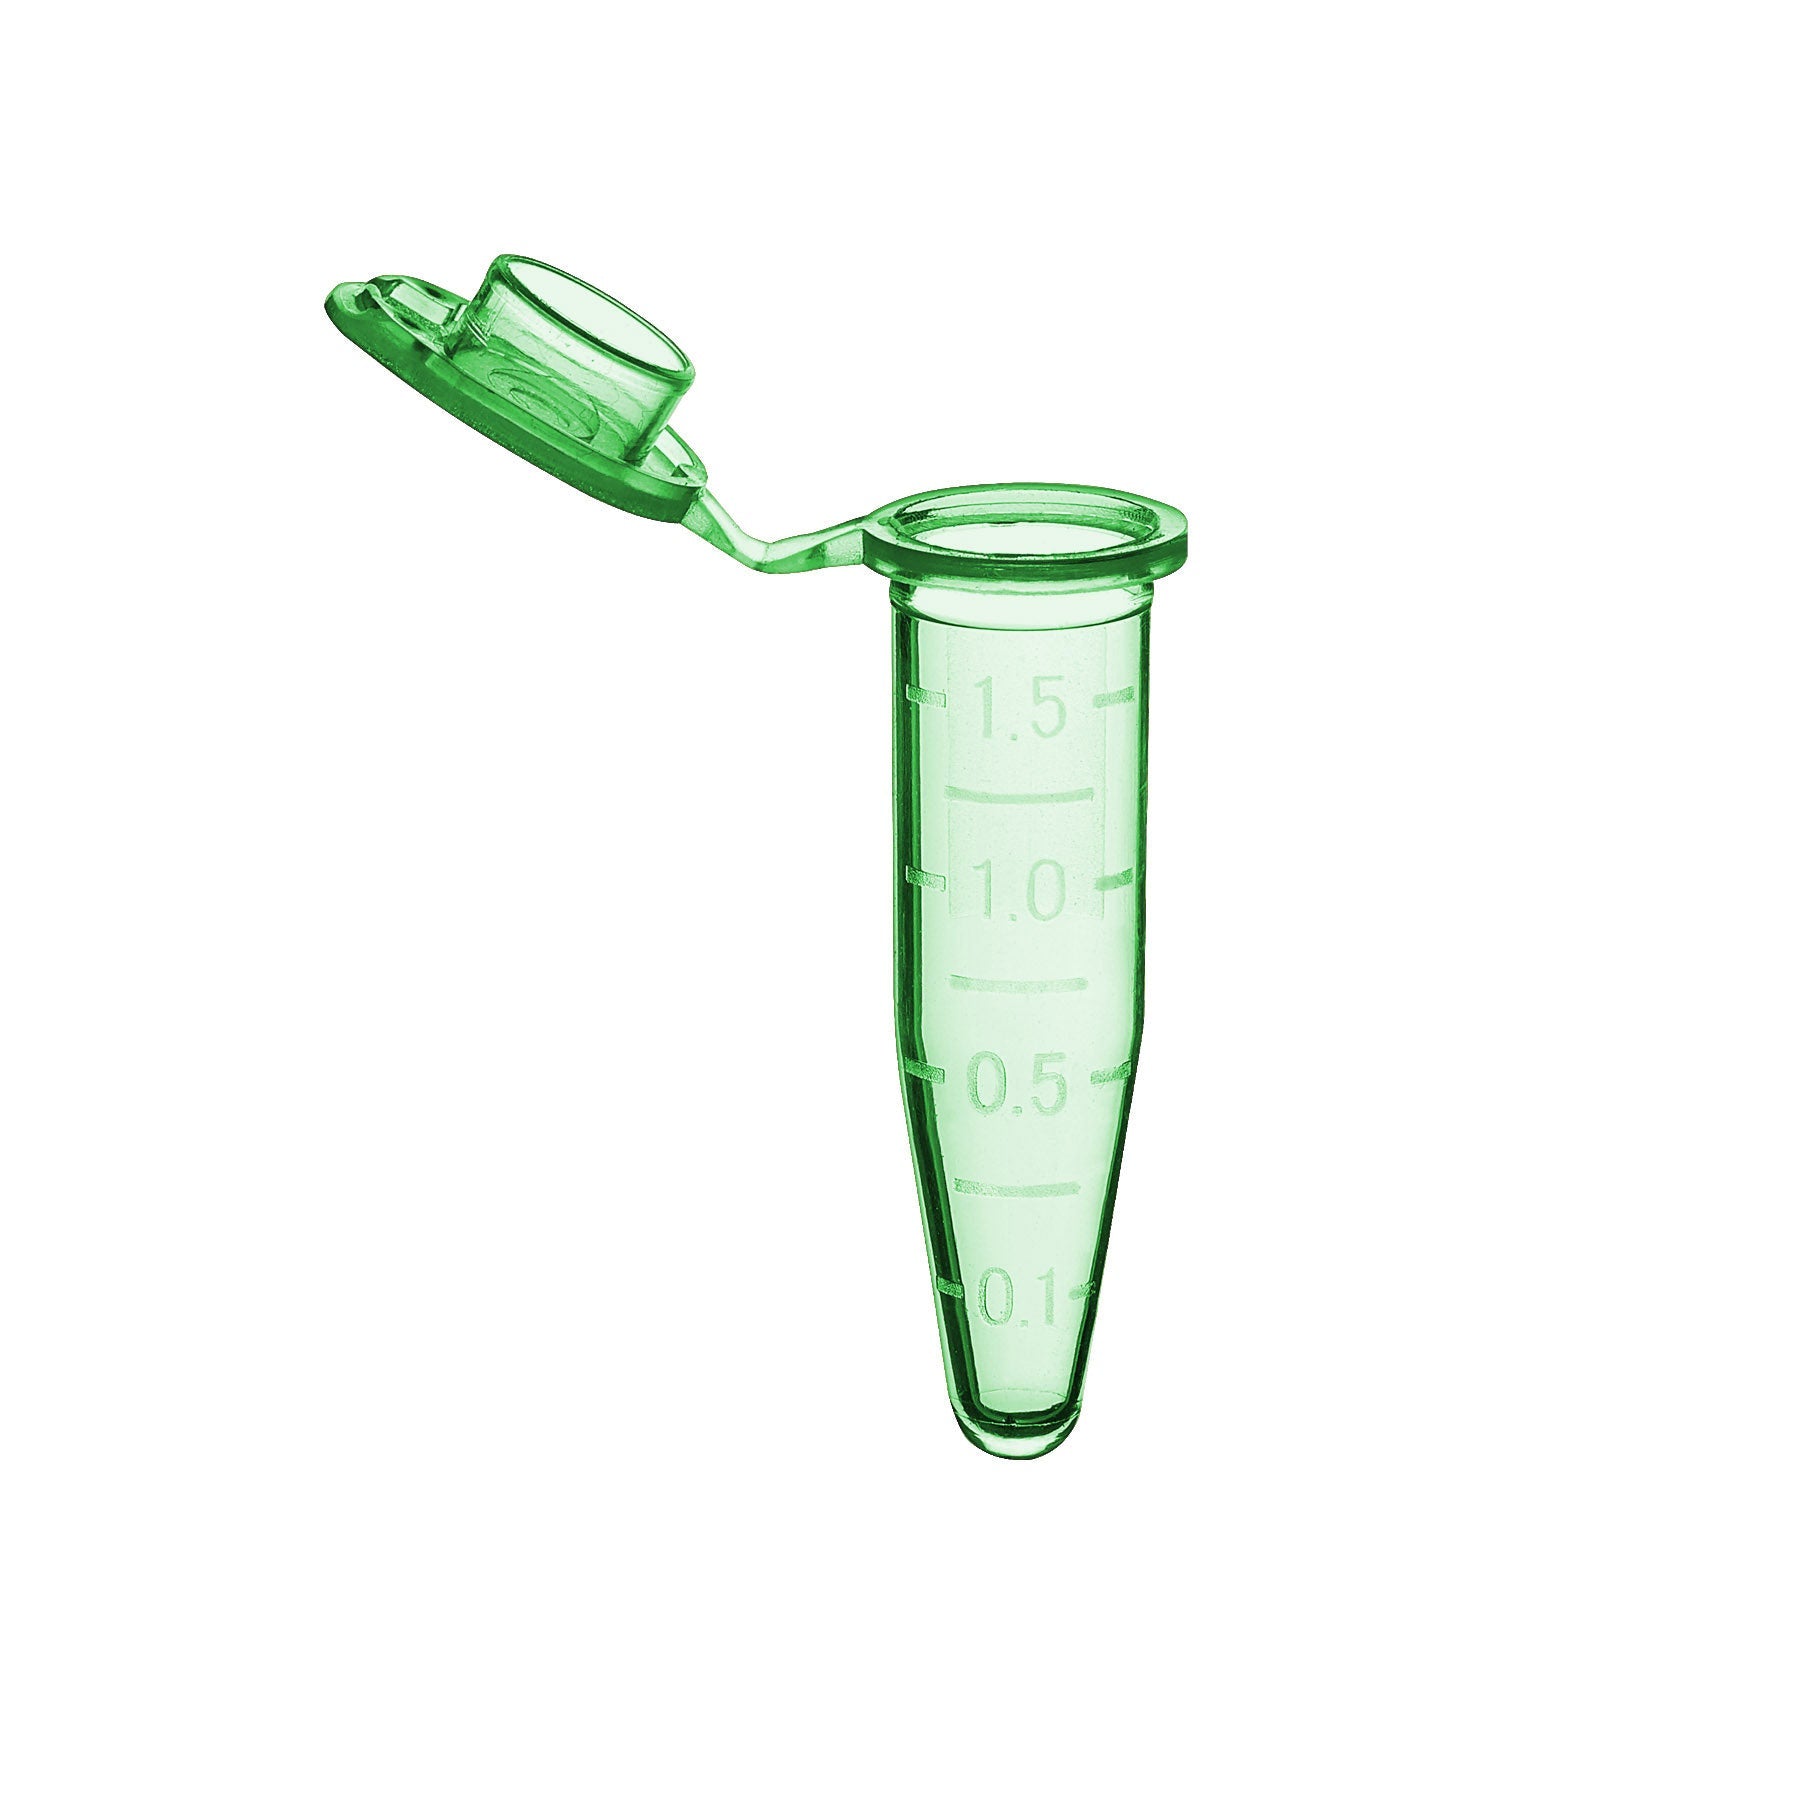 MTC Bio C2000-G, SureSeal Microcentrifuge Tube with Cap, 1.5ml, Green, Sterile, with Self-Standing Bag & Stop-Pops, 500/pk